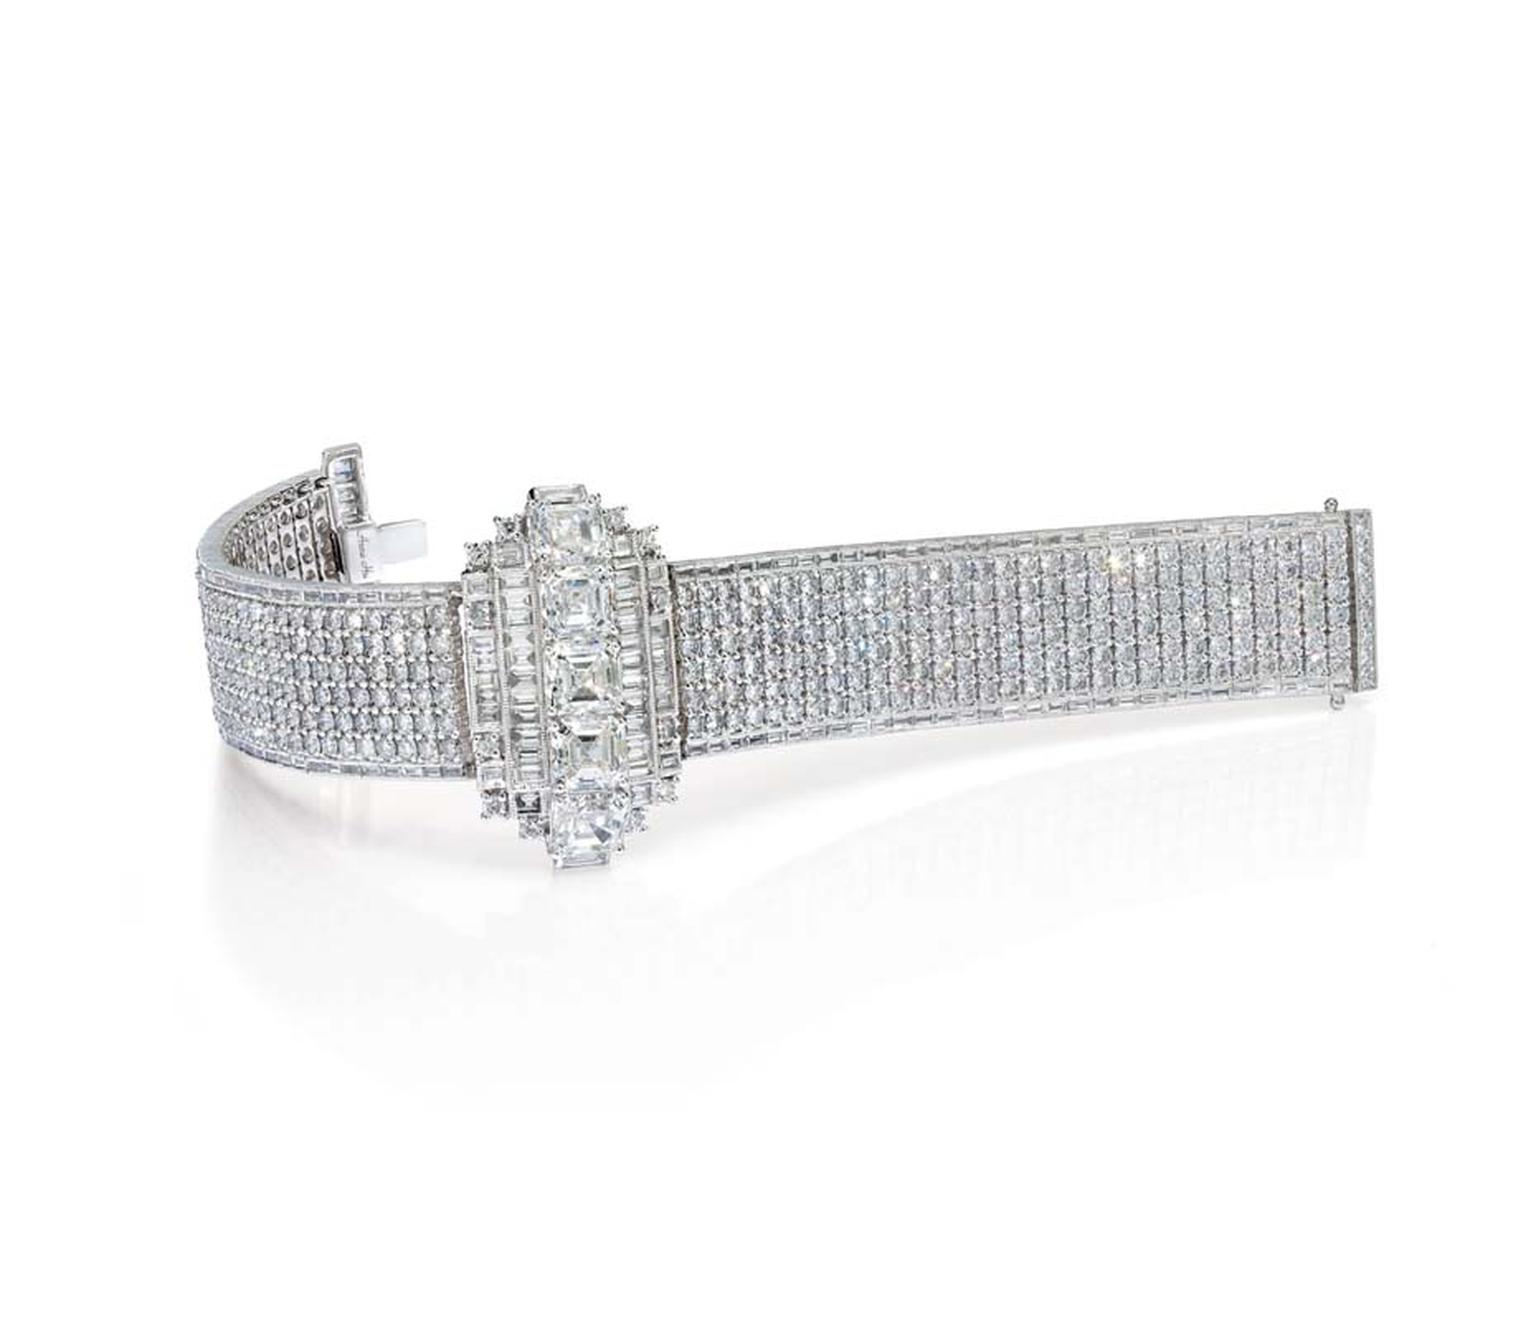 Anna Hu's one-of-a-kind Wallis Simpson bracelet, as worn by Naomi Watts at the Oscars, was inspired by the Duchess of Windsor, and features 5 baguette cut white diamonds and 380 brilliant cut diamonds set in white gold.